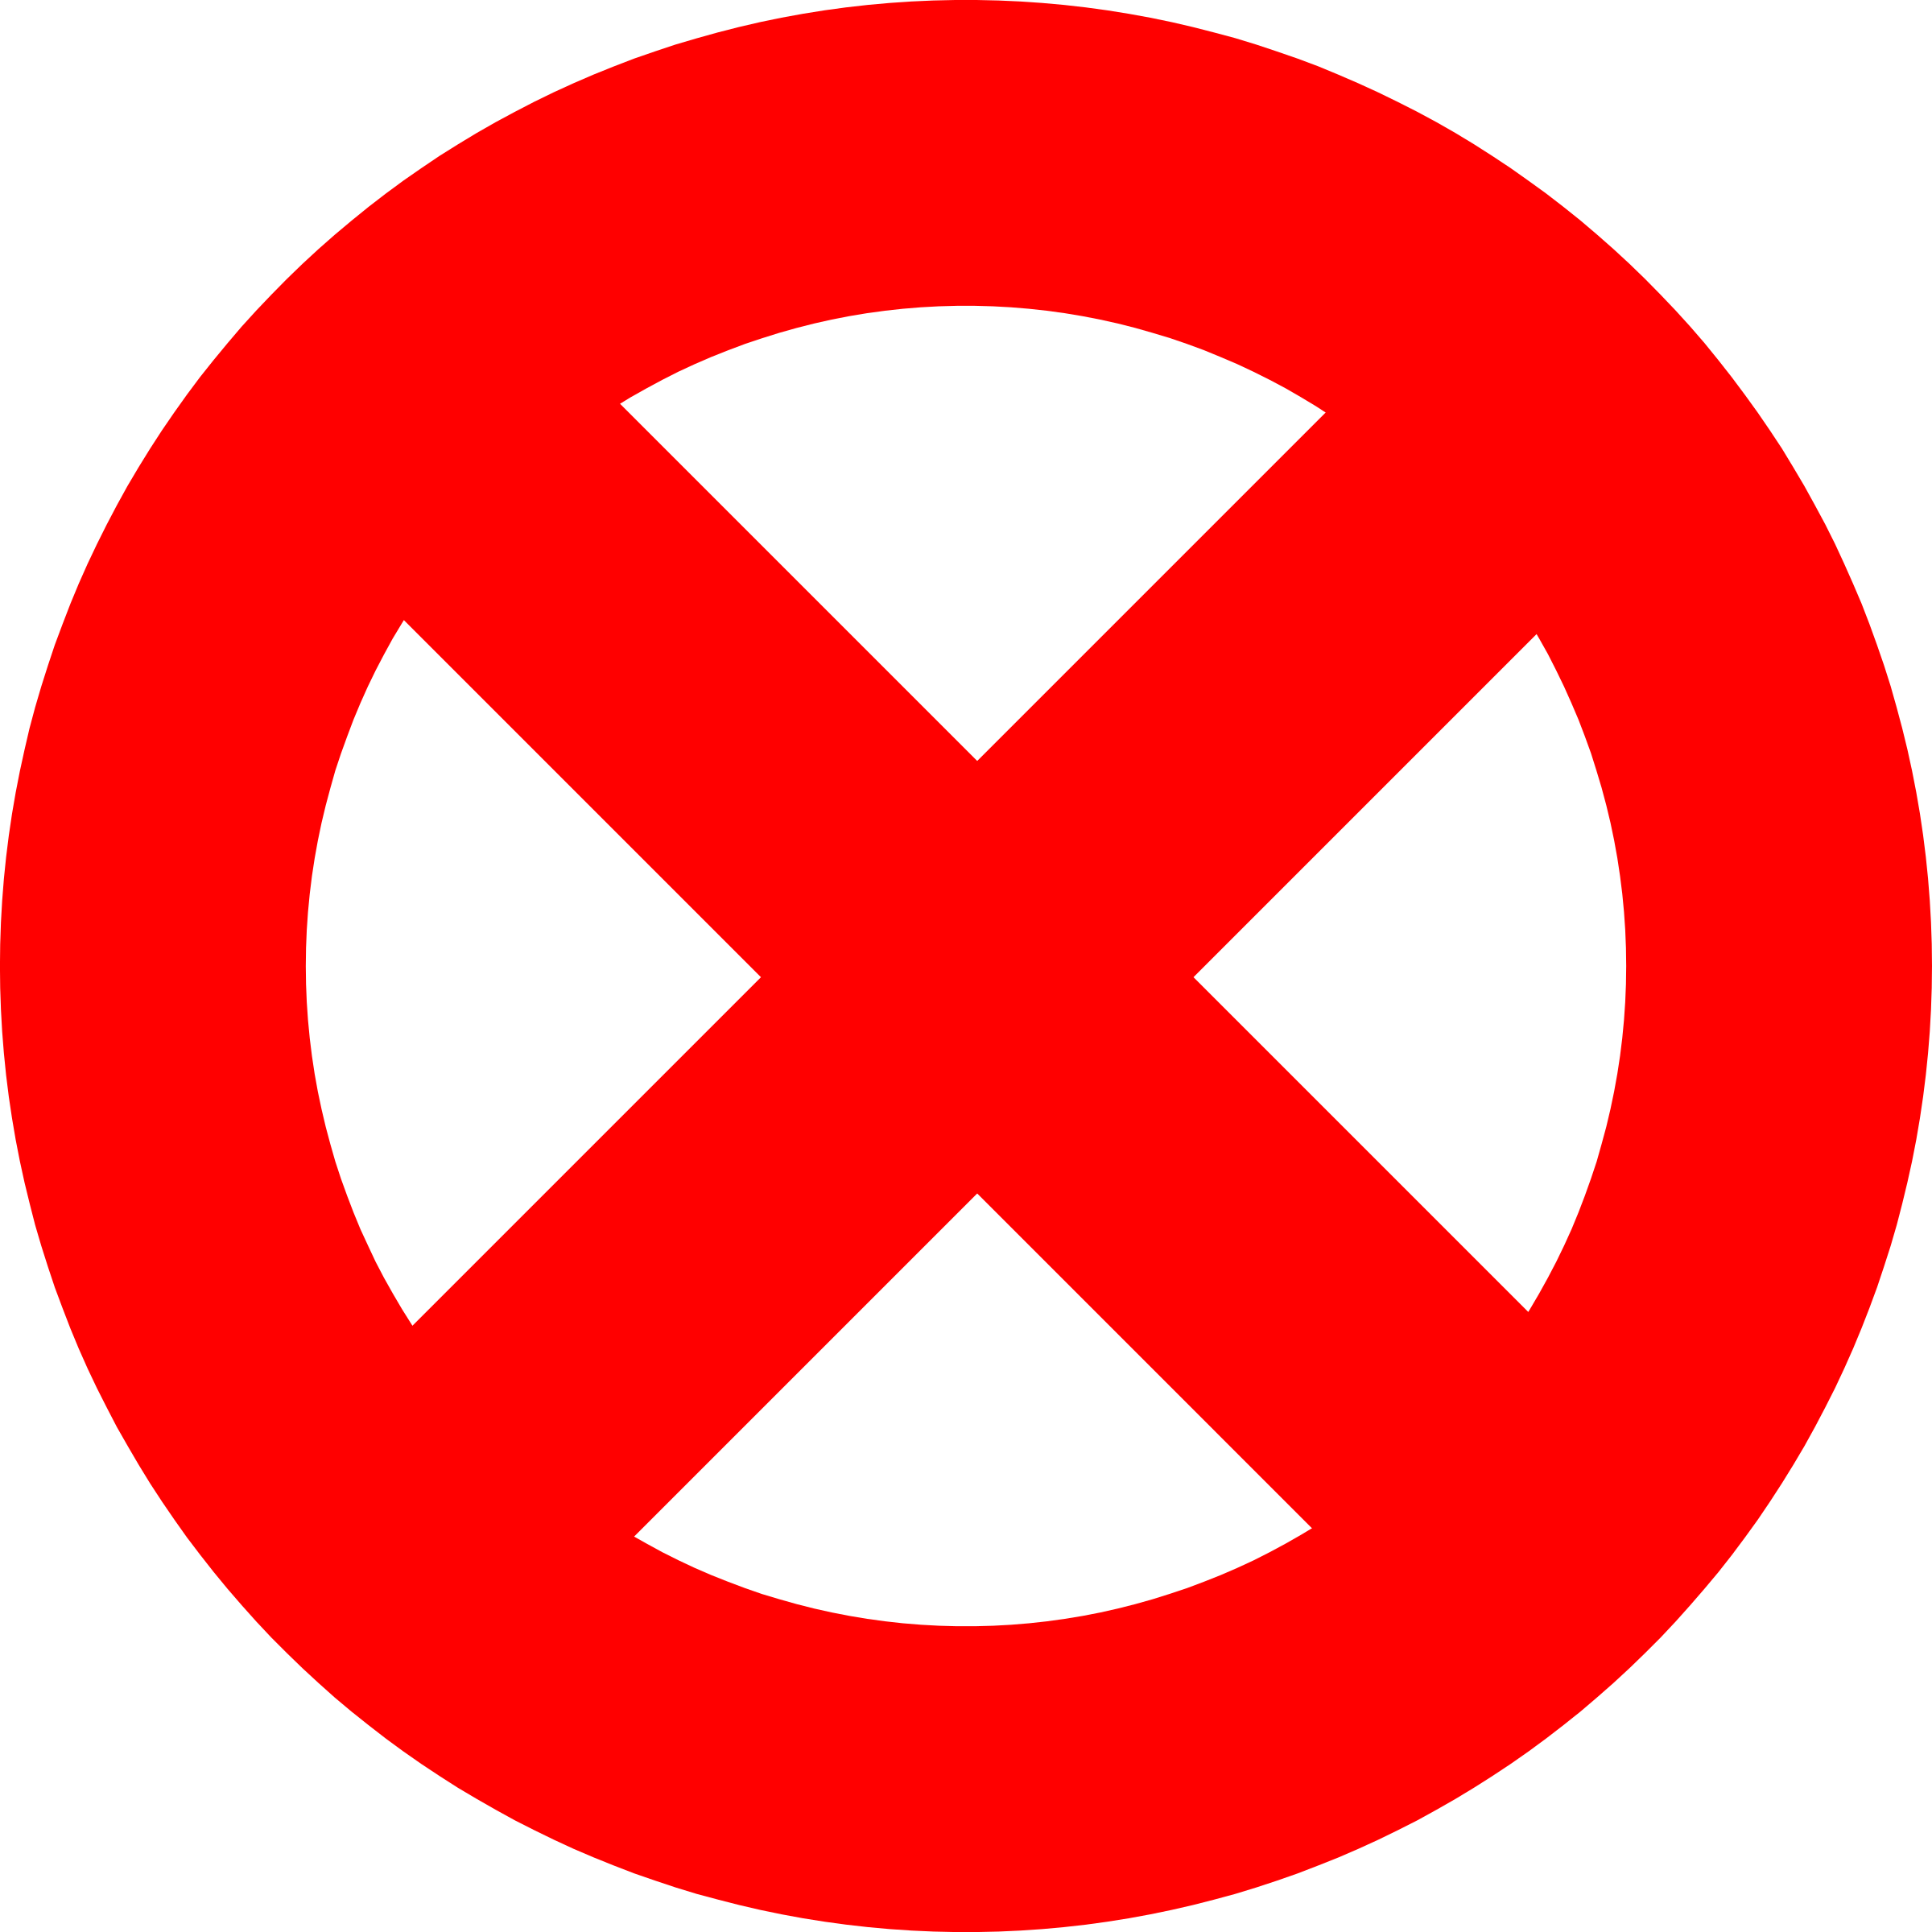 Prohibited sign clipart